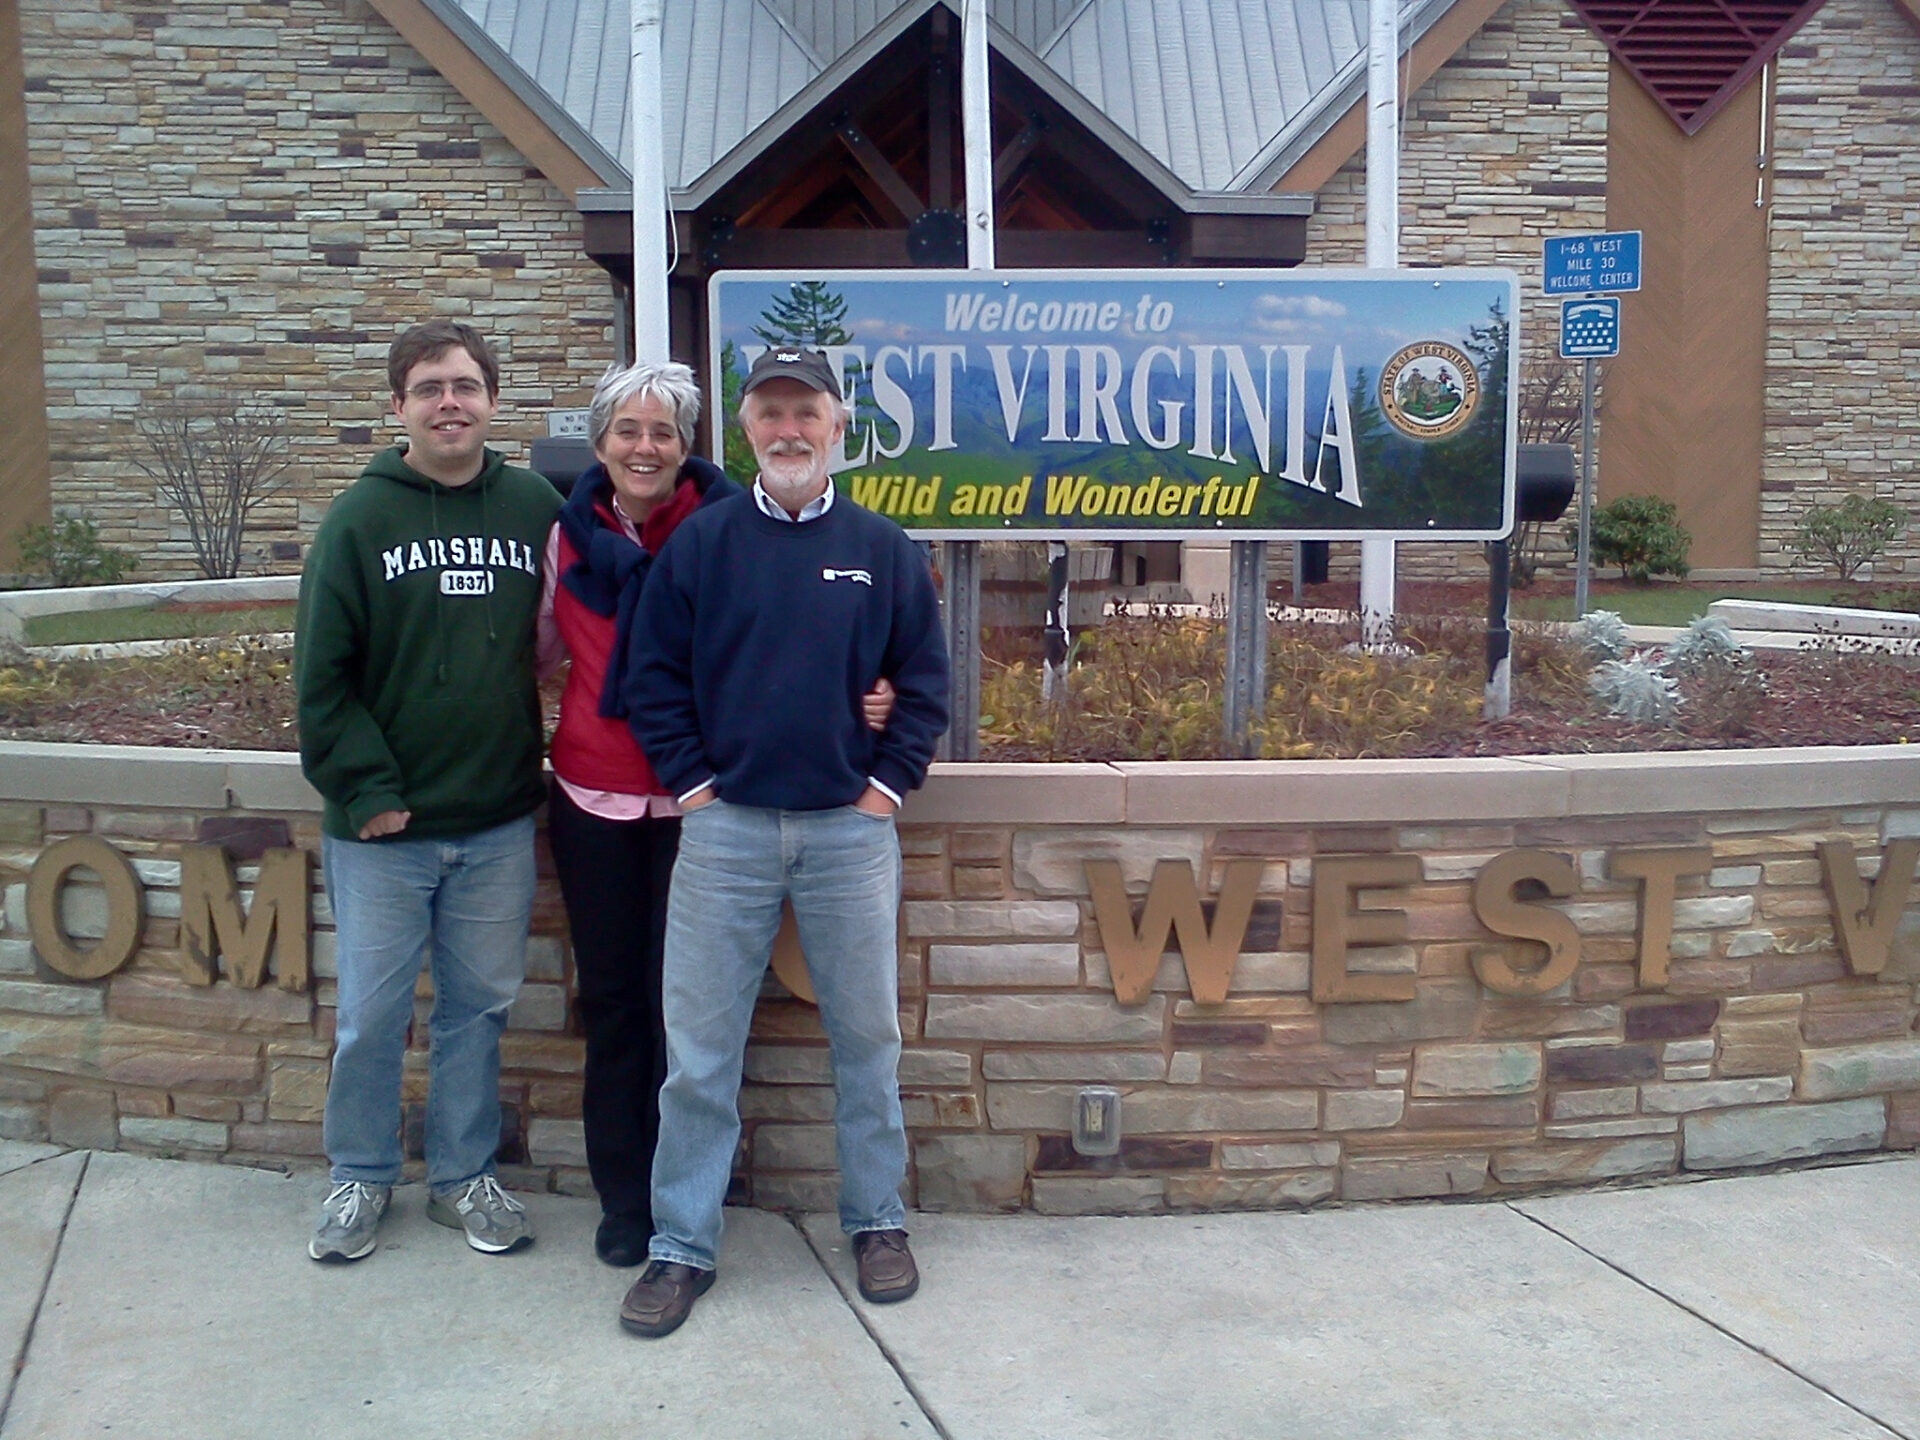 From Corn Liquor to State Pride – Origins of ‘West by God Virginia’